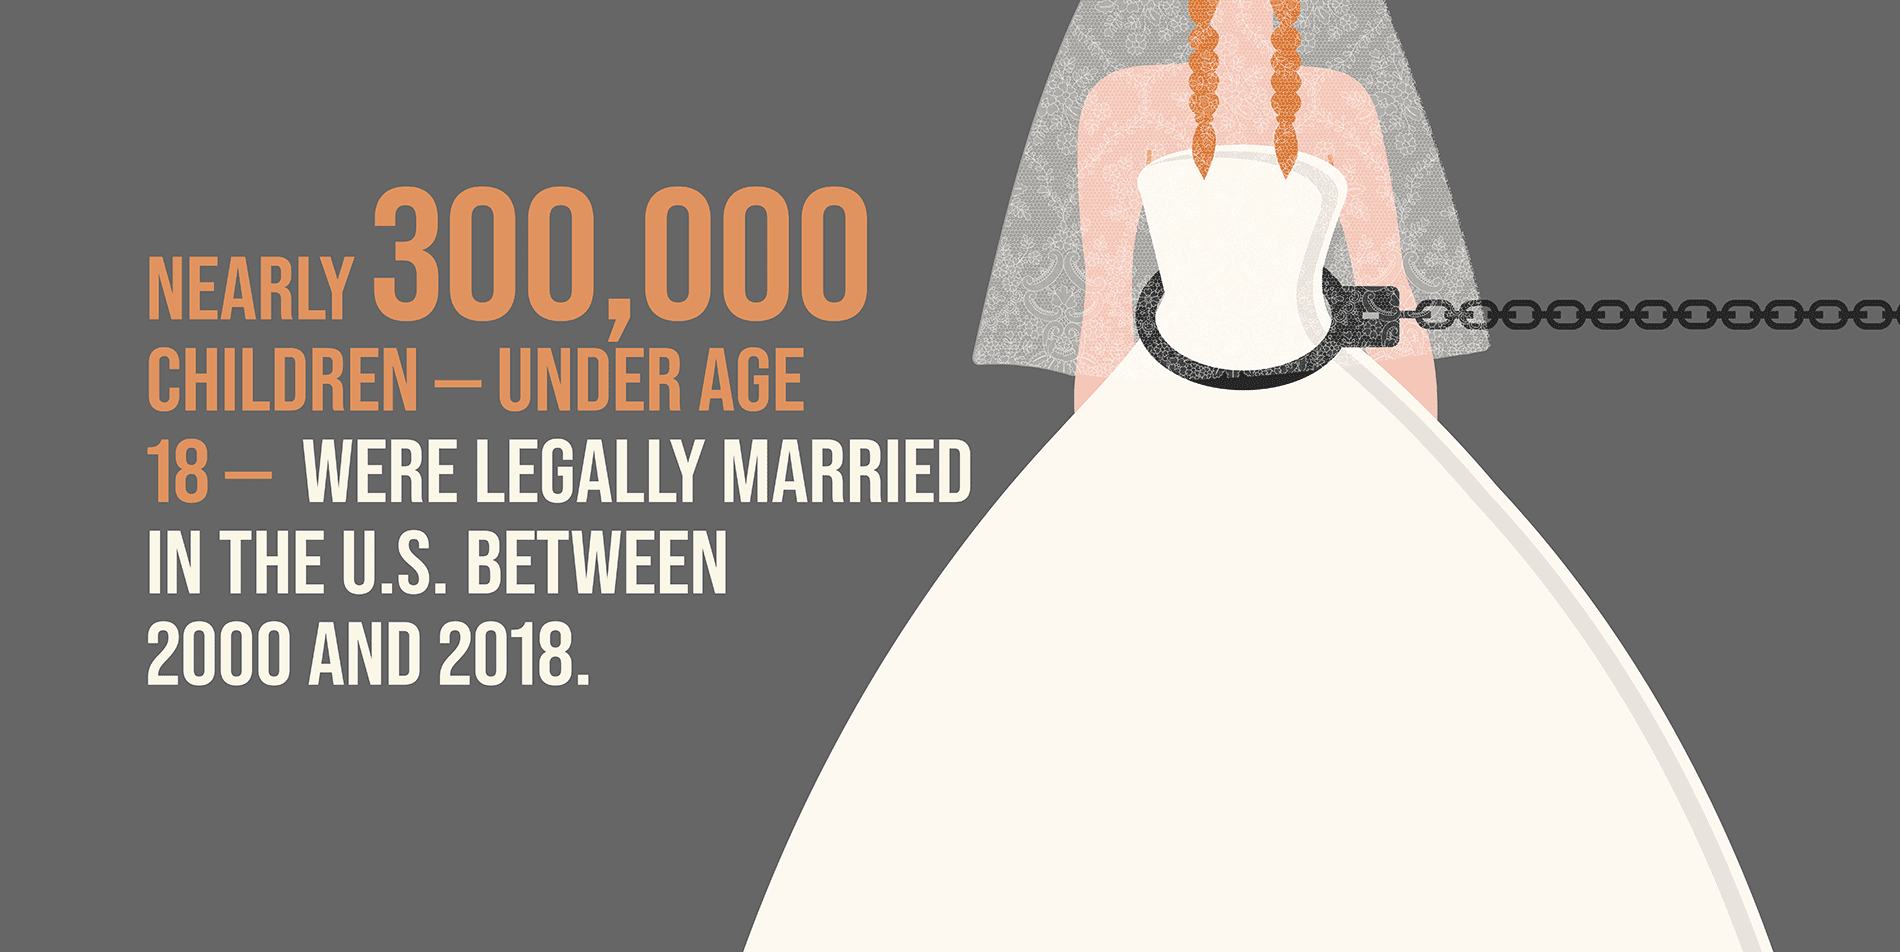 Graphic: Nearly 300,000 children -- under age 18 -- were legally married in the U.S. between 2000 and 2018.